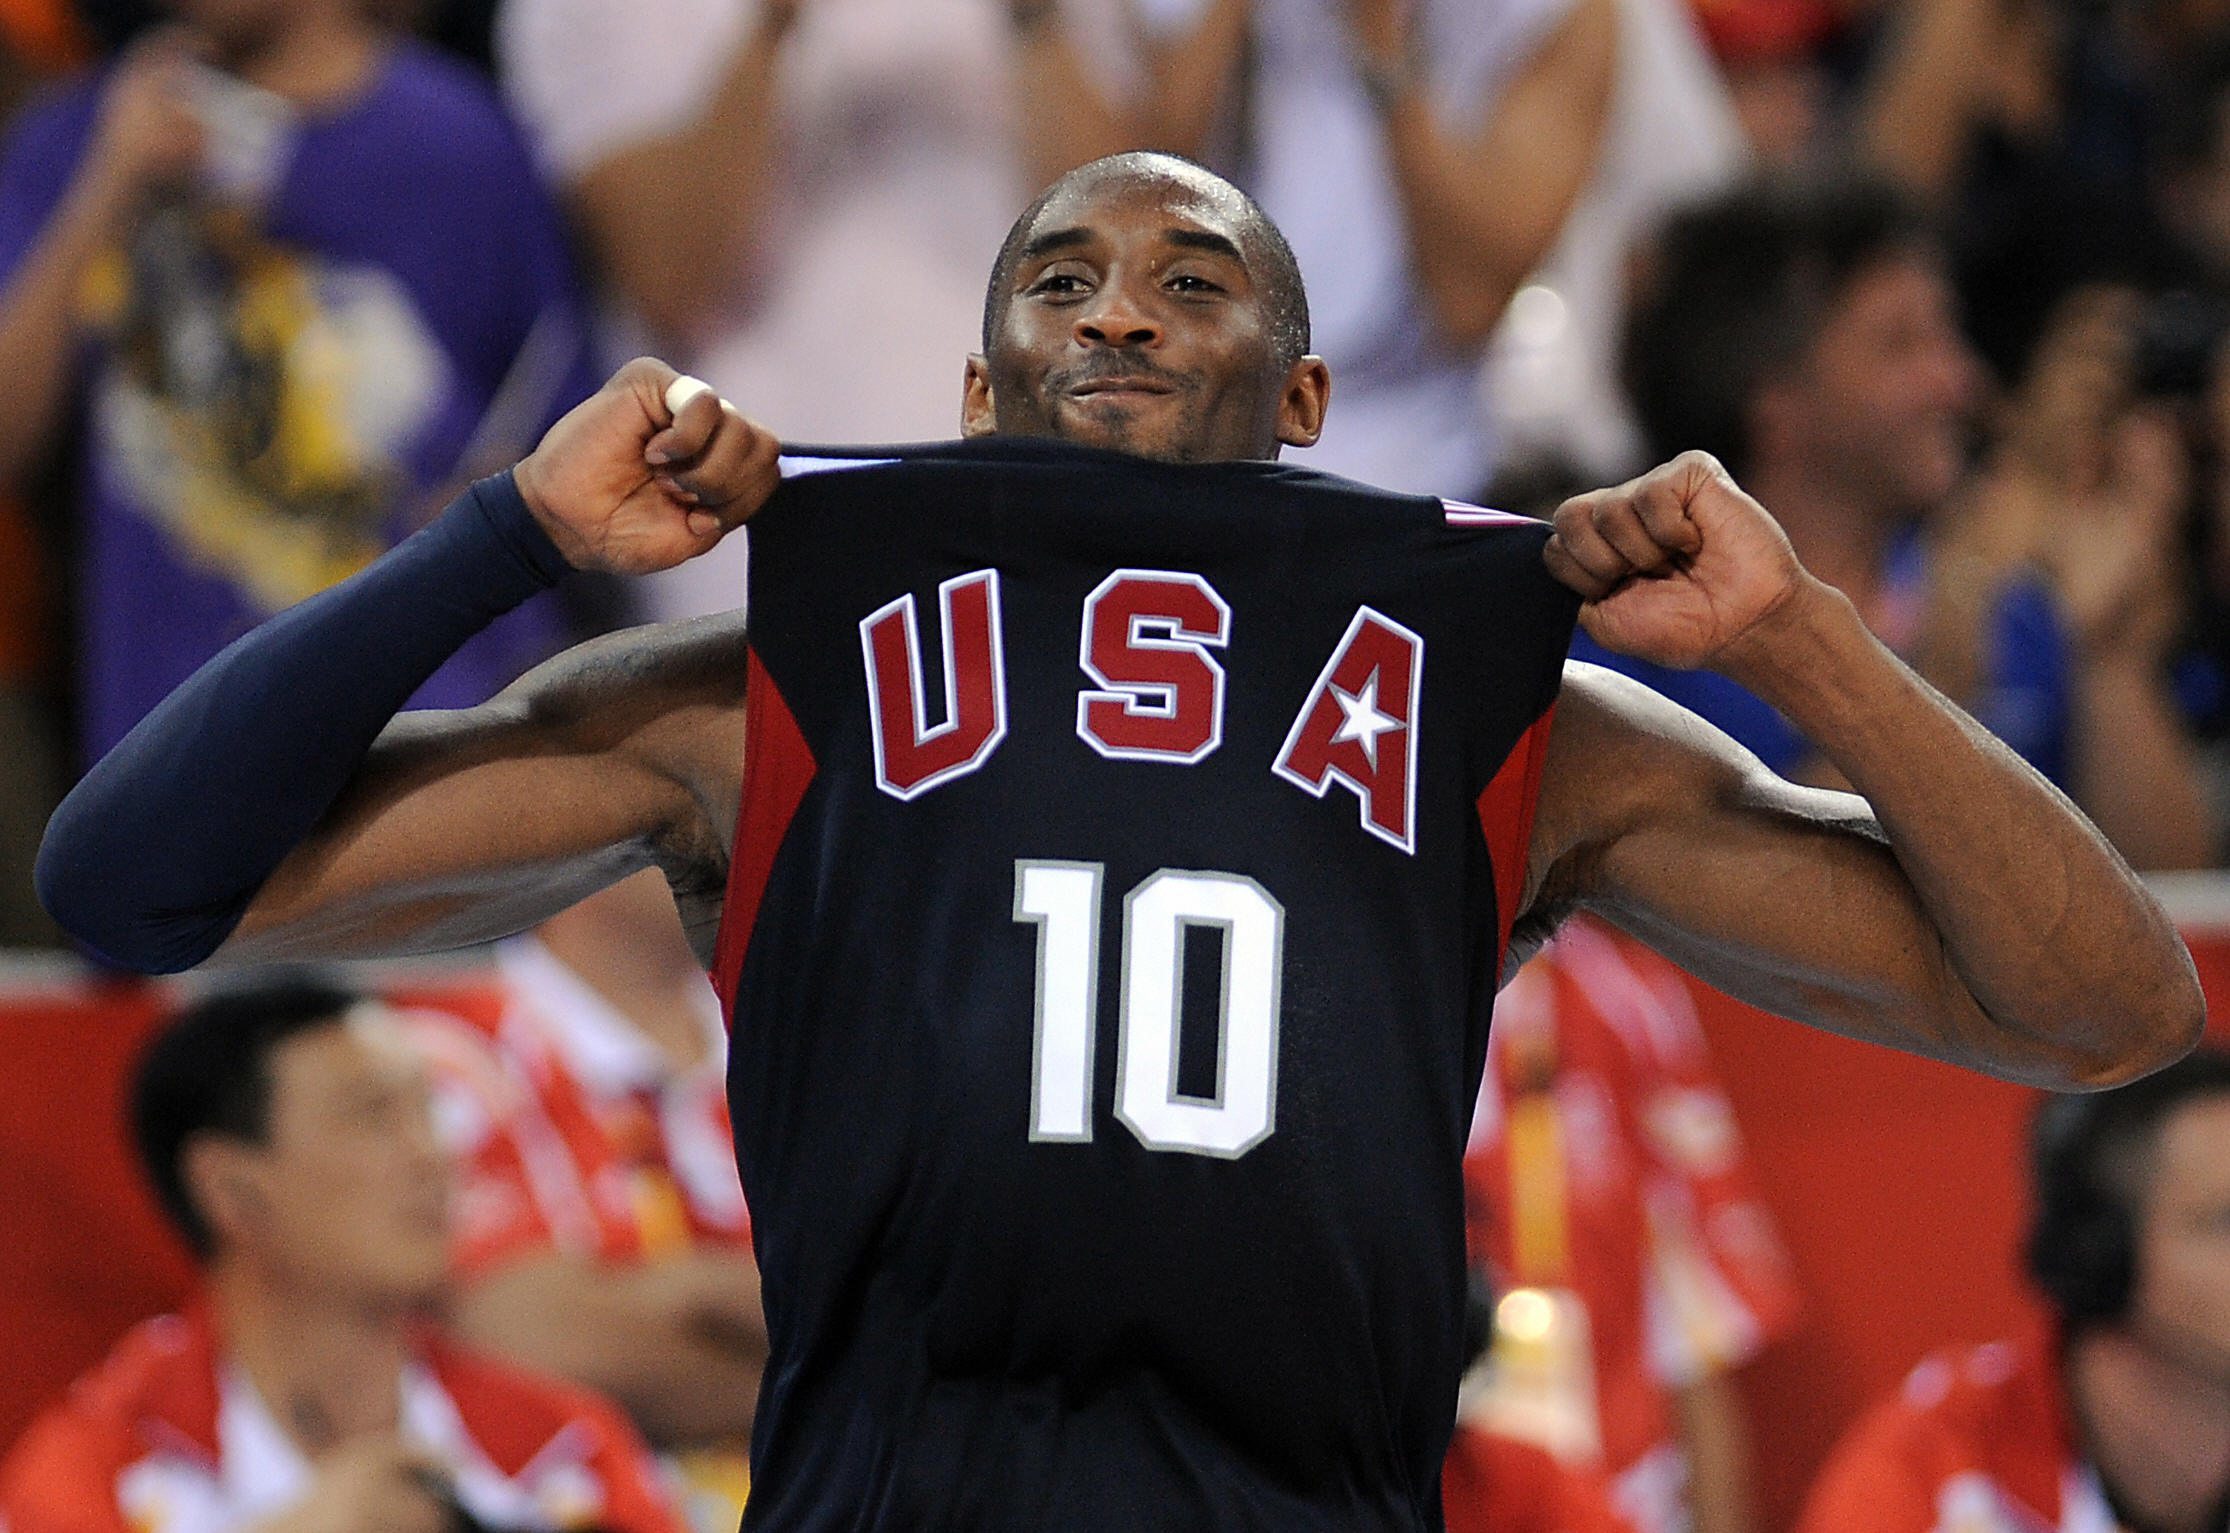 London 2012 Olympics: USA 'Dream Team' retain gold medal with